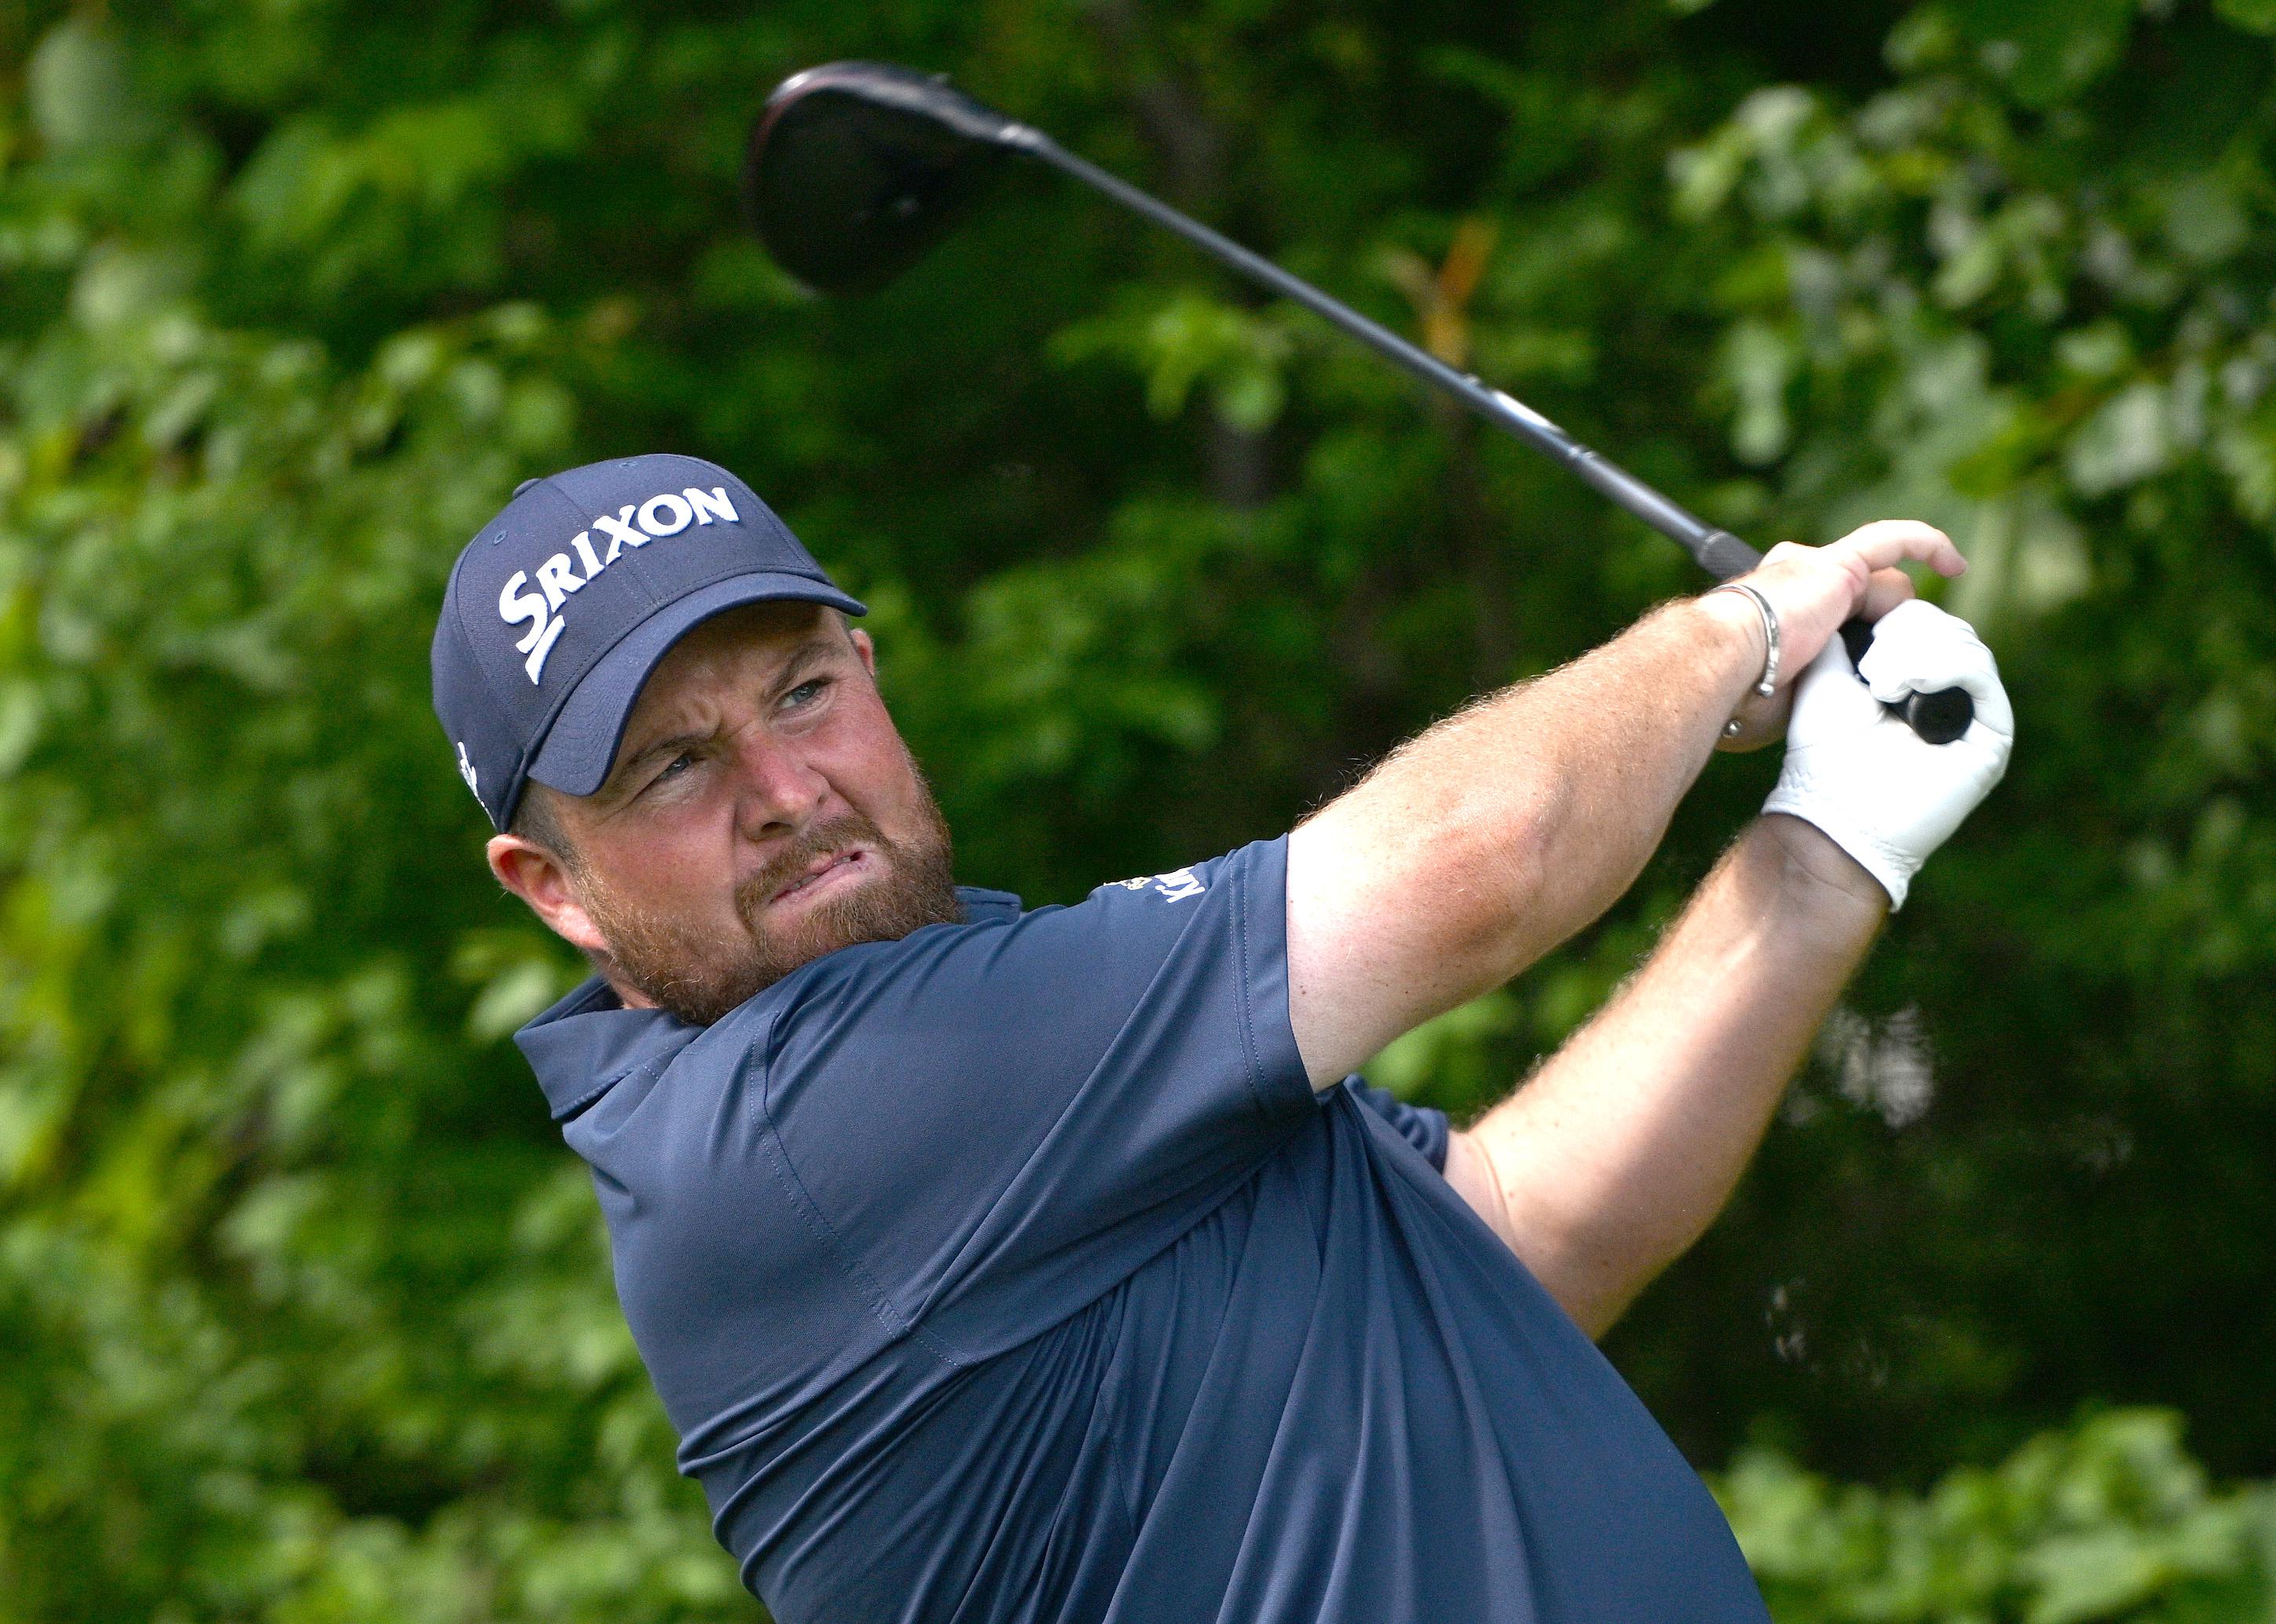 Shane Lowry U.S. Open 2022 Odds, History & Predictions